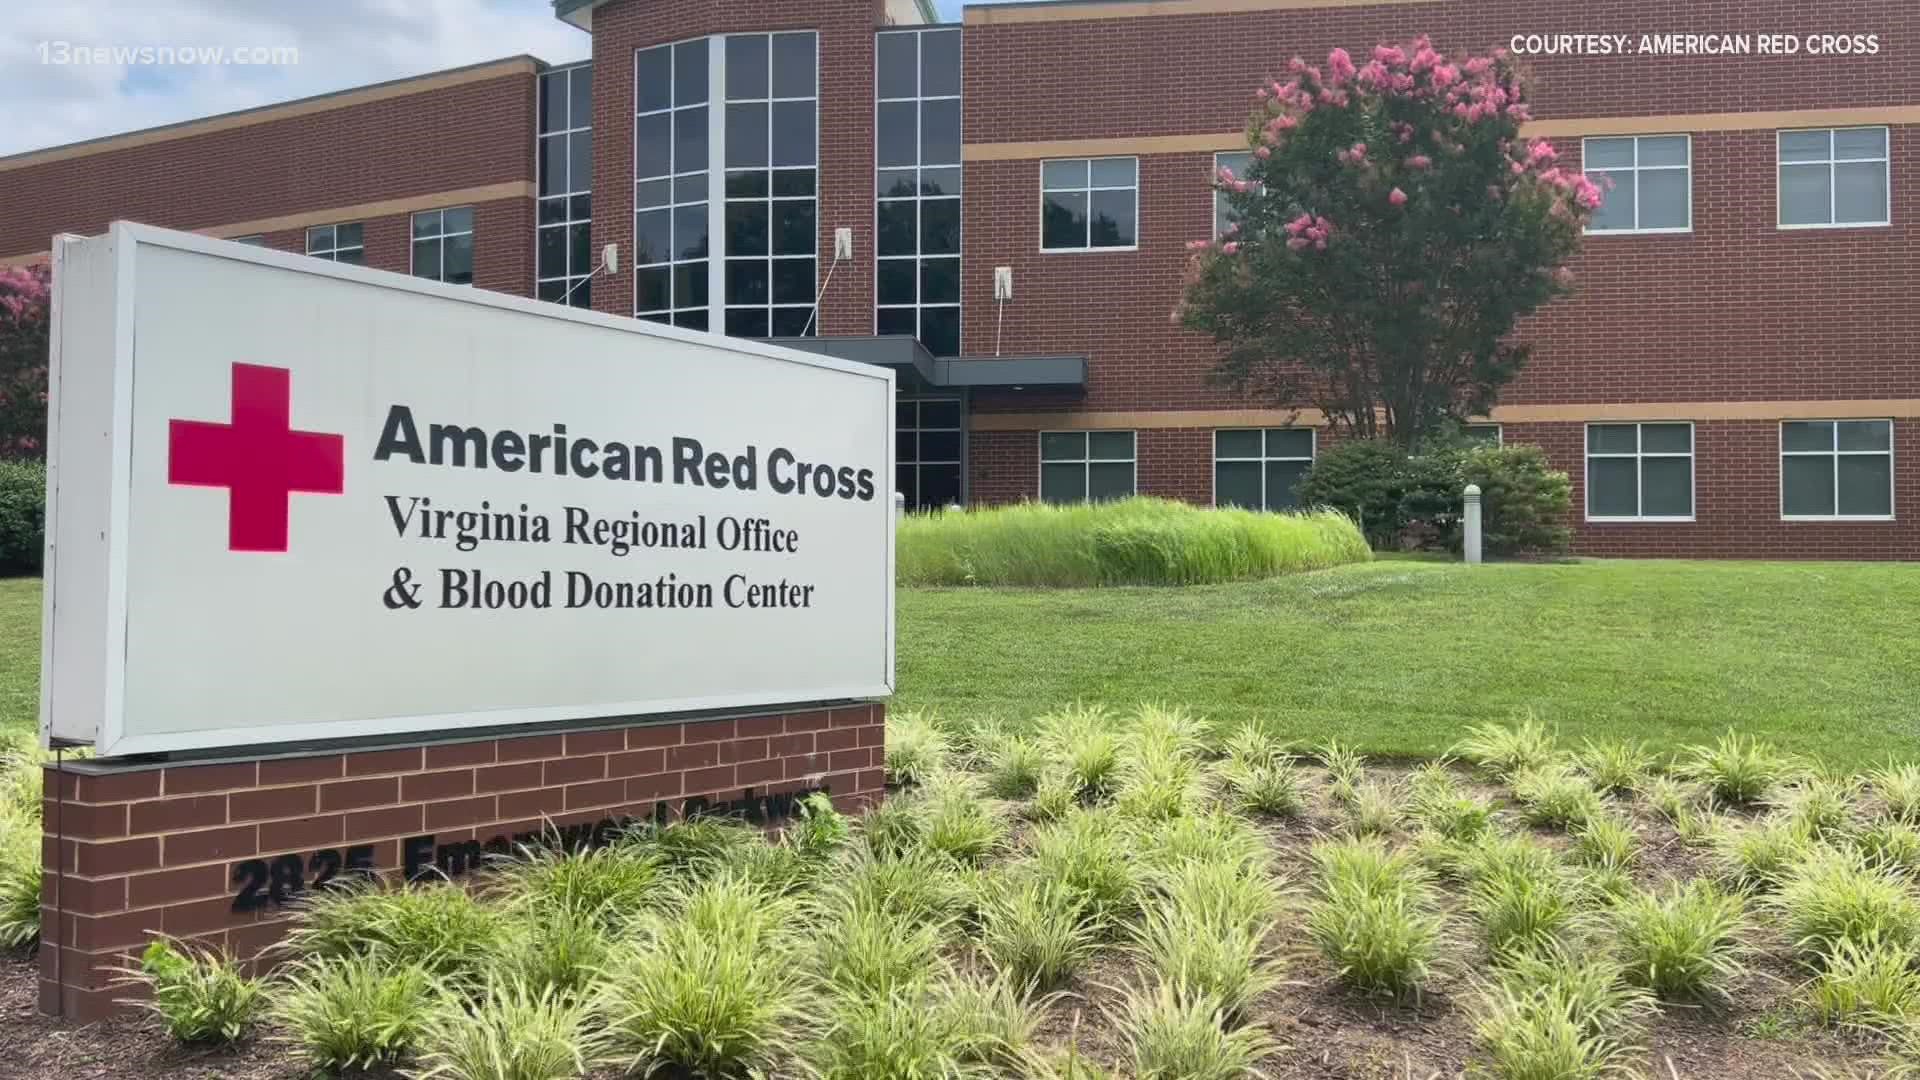 Blood donations are down this summer and the Red Cross attributes part of that to rising COVID cases. They say it's causing some to rethink if it's safe to donate.